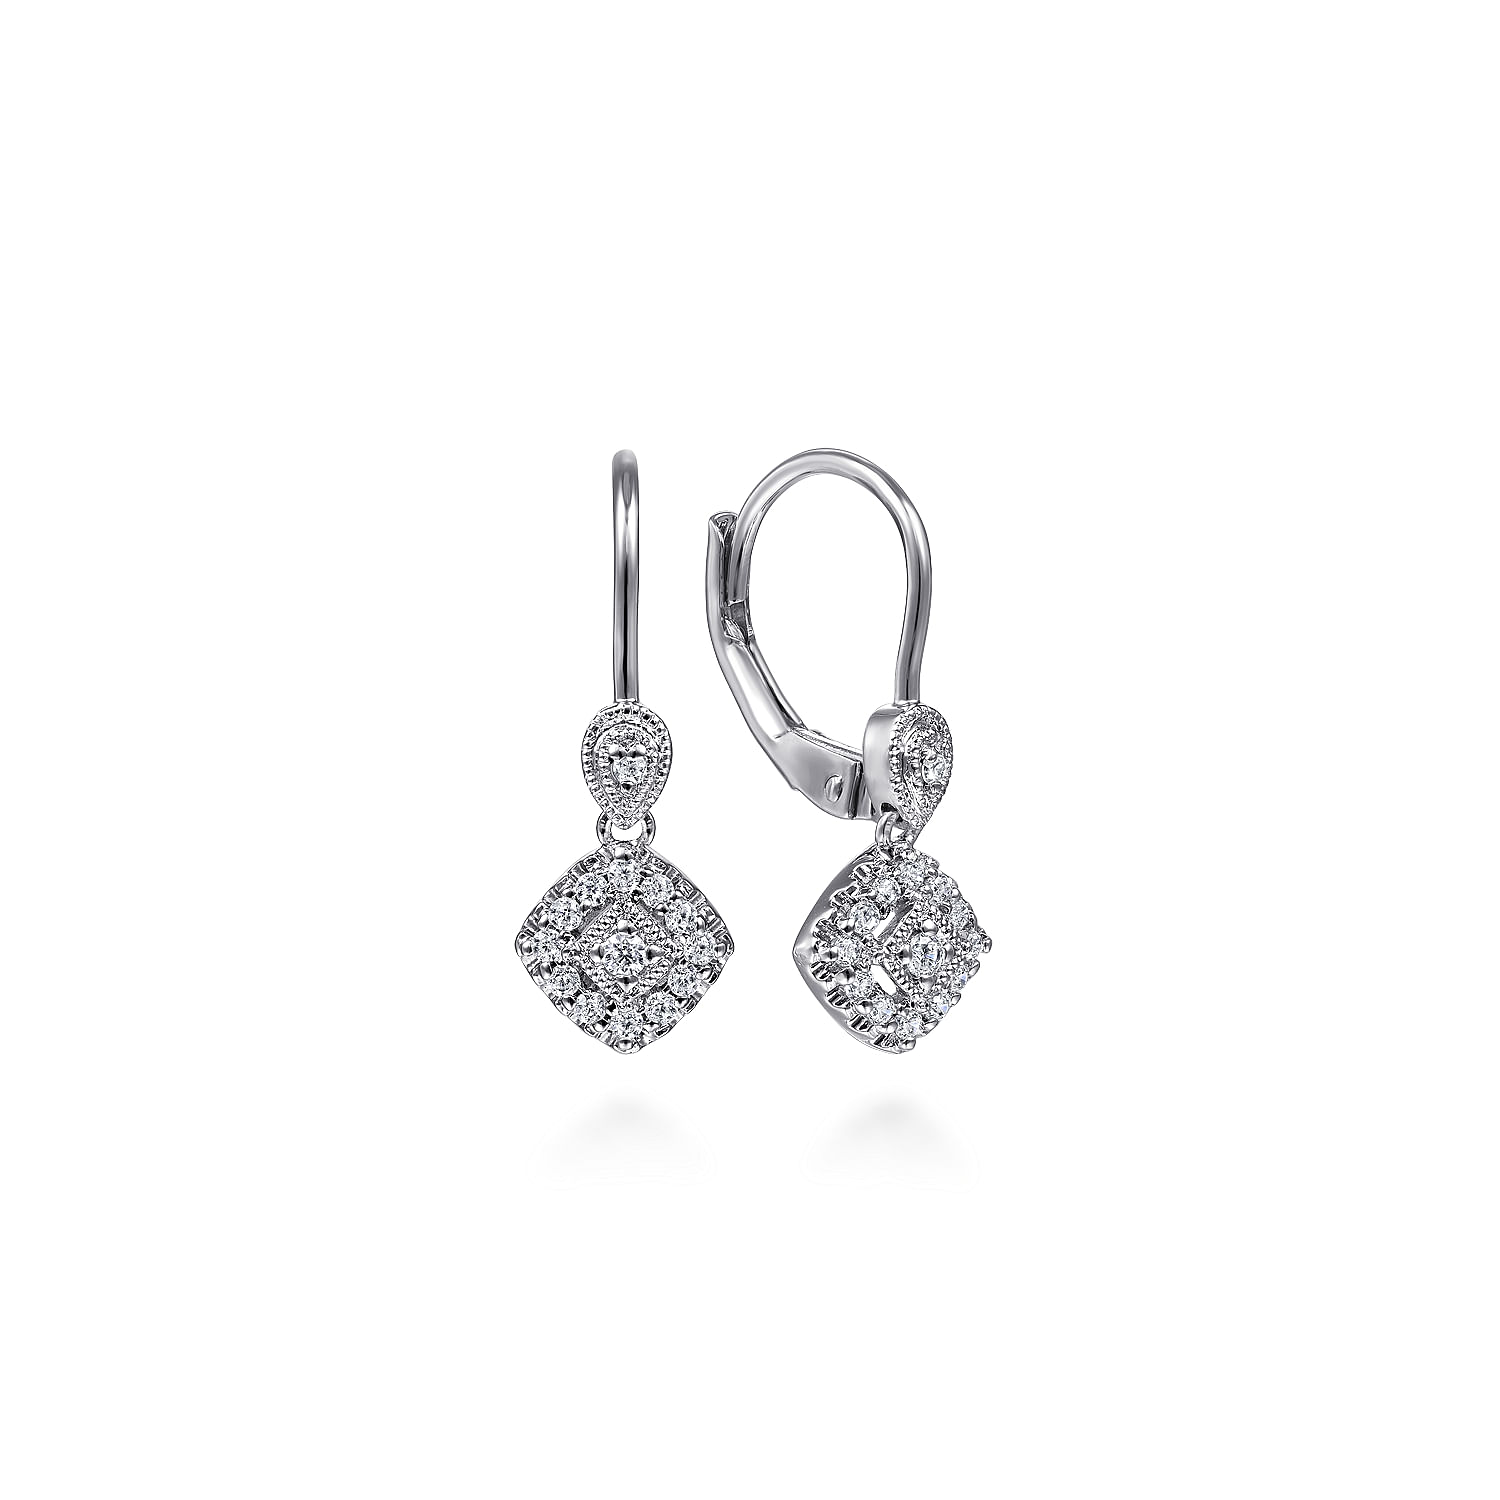 14K White Gold Vintage Inspired Style Square Diamond Drop Earrings